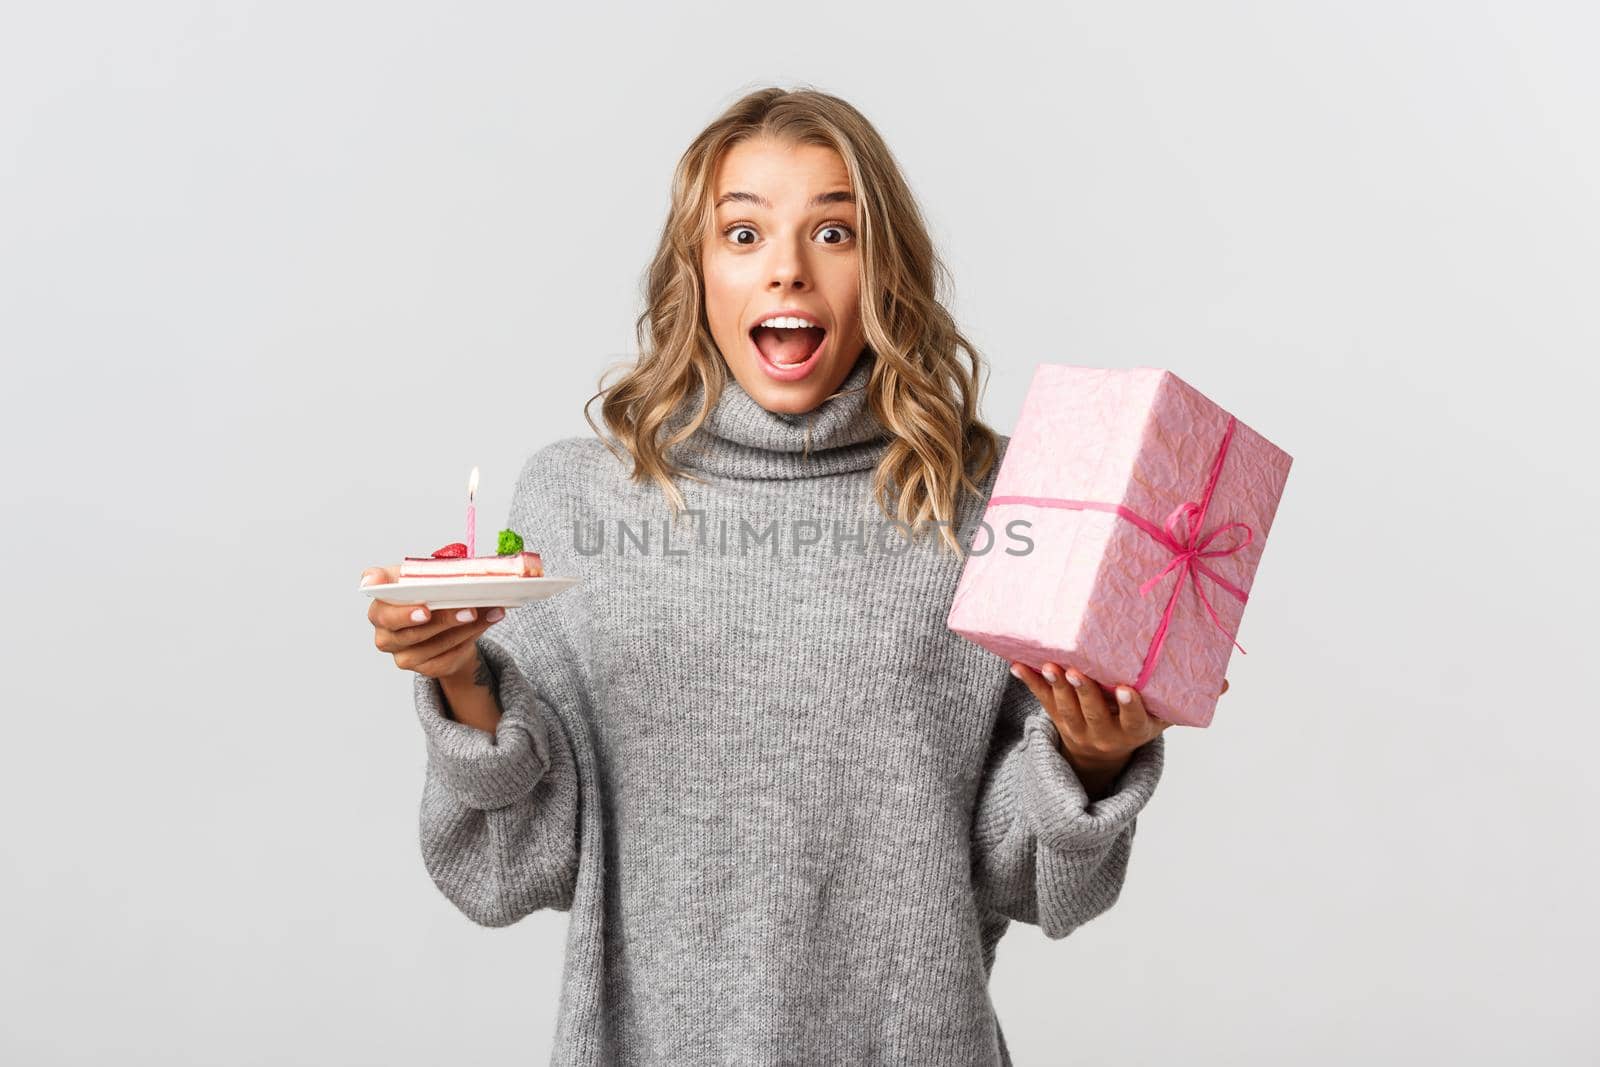 Image of attractive blond girl celebrating birthday, looking surprised, holding b-day cake and a gift, standing over white background.